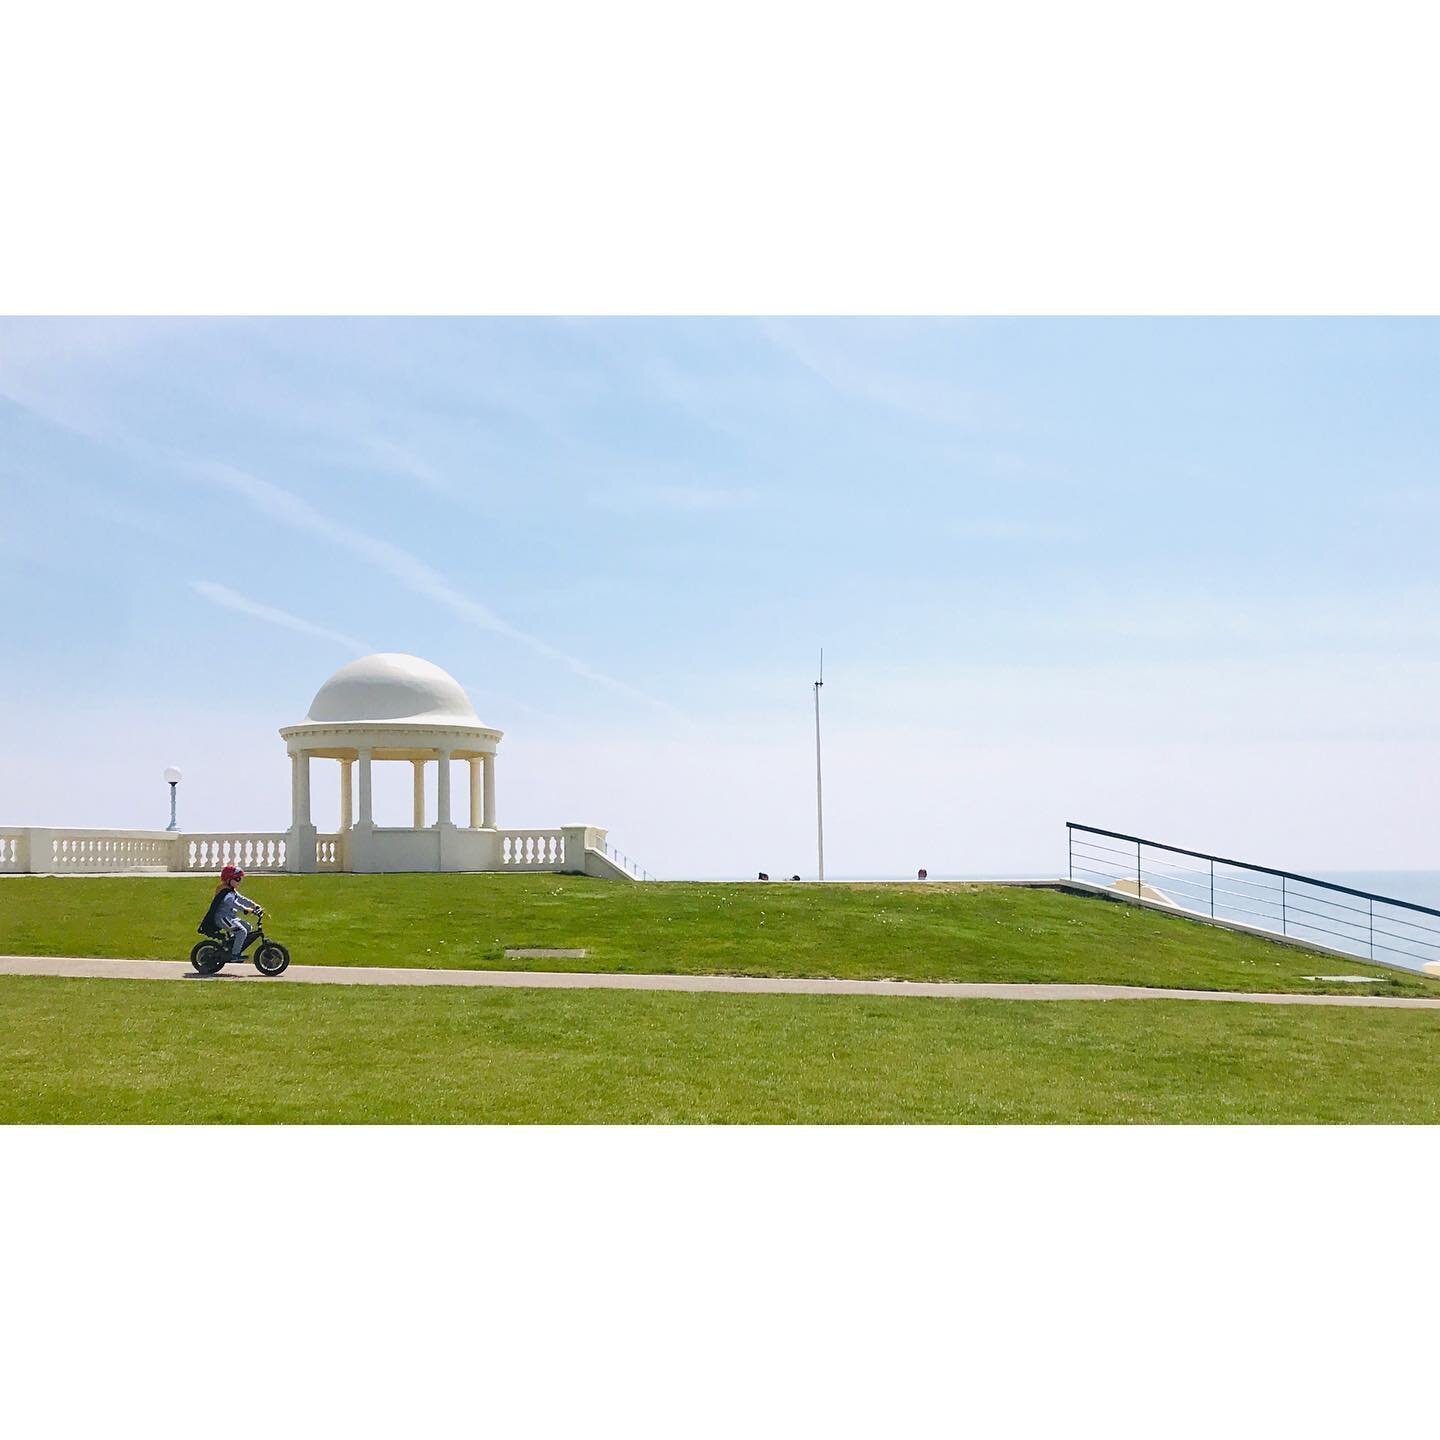 This little boy on his bike, dressed as a superhero (cape and batman visor just visible!) was enjoying the social distance.
.
.
.
.
.
.
#delawarpavillion #bexhill #socialdistancing #instadaily #superhero #youngboy #summer 
#composition